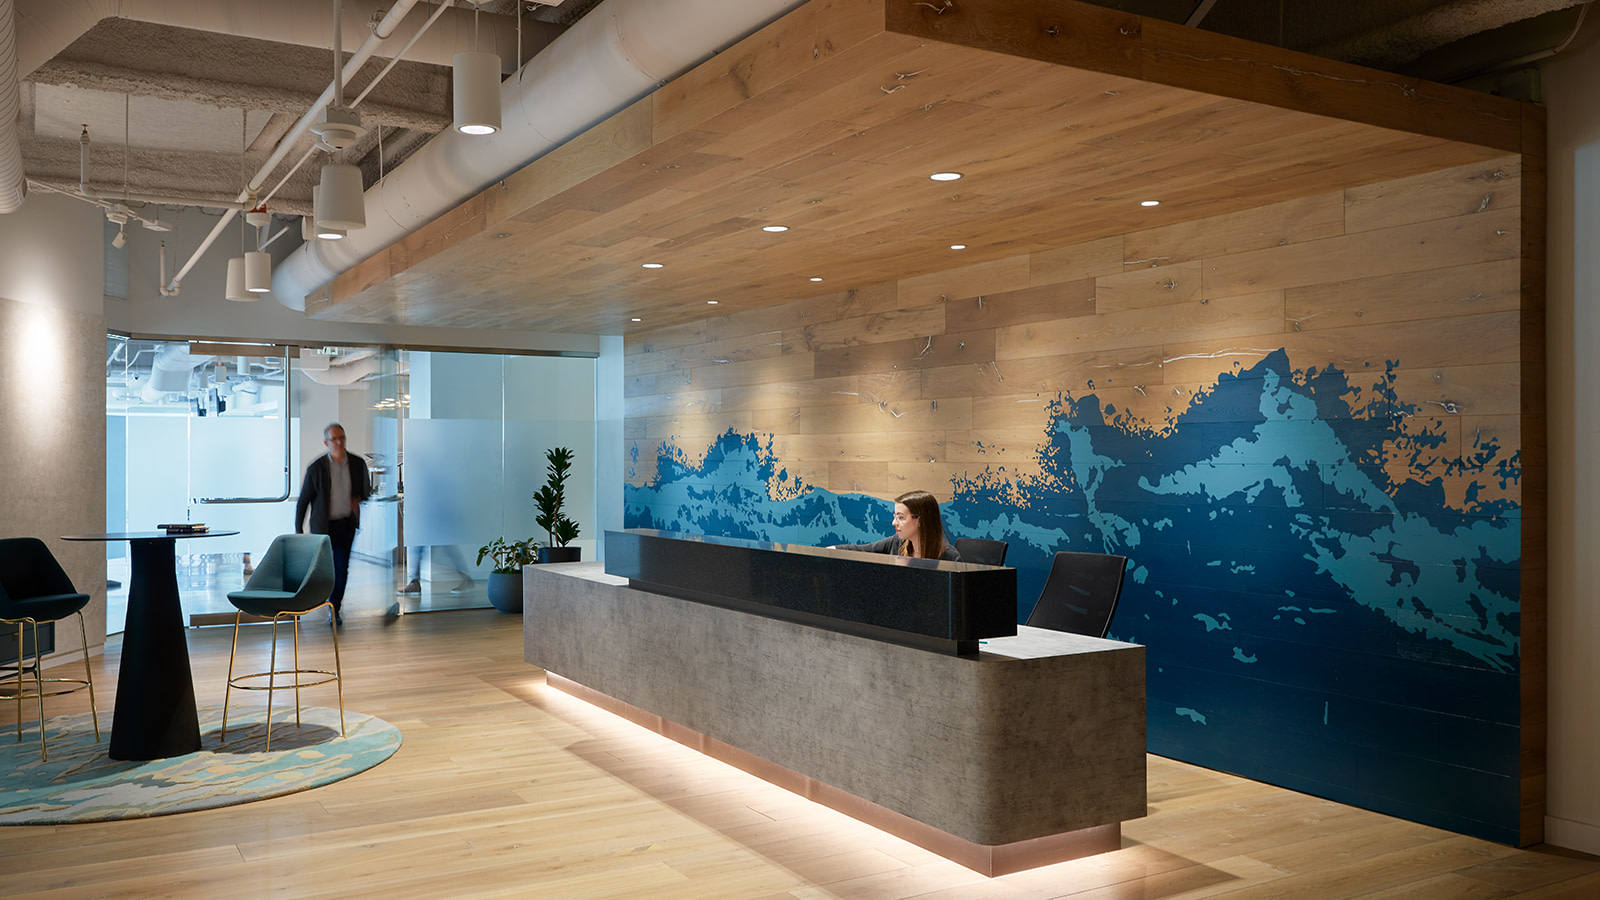 The reception desk at Uber's Seattle Offices